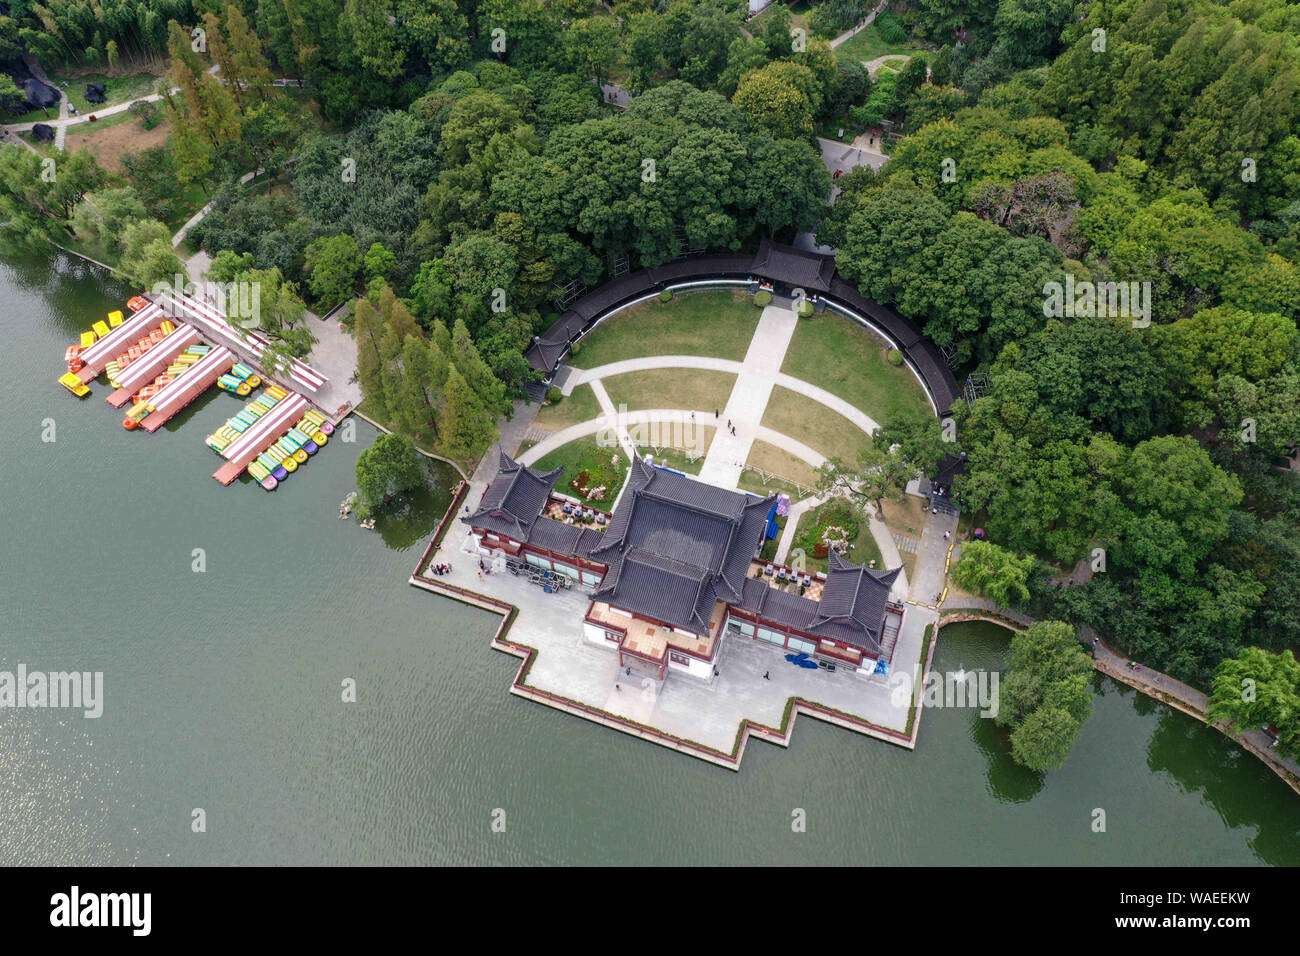 Jiangsu, Jiangsu, China. 20th Aug, 2019. Nanjing, CHINA-Aerial photo of Mochou lake park in Nanjing, east China's Jiangsu province, Aug. 18, 2019.Mochou lake is a famous classical garden in the south of the Yangtze river with a long history of 1500 years and rich cultural resources.Since ancient times, it has been known as ''the first lake in Jiangnan'', ''the first scenic spot in Jinling'' and ''the first of forty-eight scenic spots in Jinling' Credit: SIPA Asia/ZUMA Wire/Alamy Live News Stock Photo